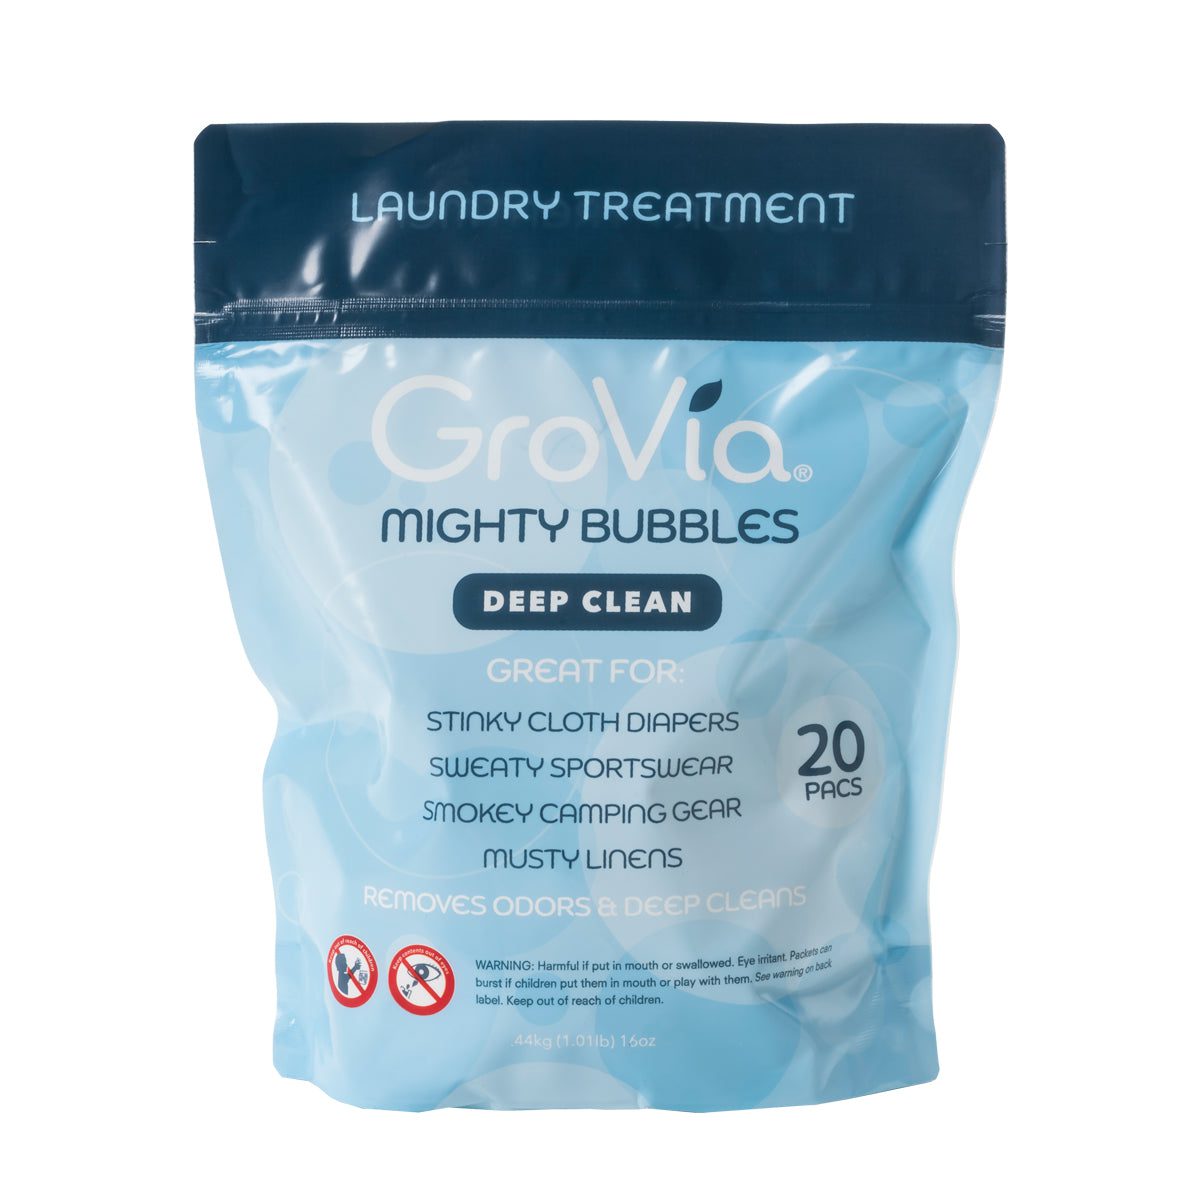 GroVia Mighty Bubbles Laundry Treatment For Baby Cloth Diapers